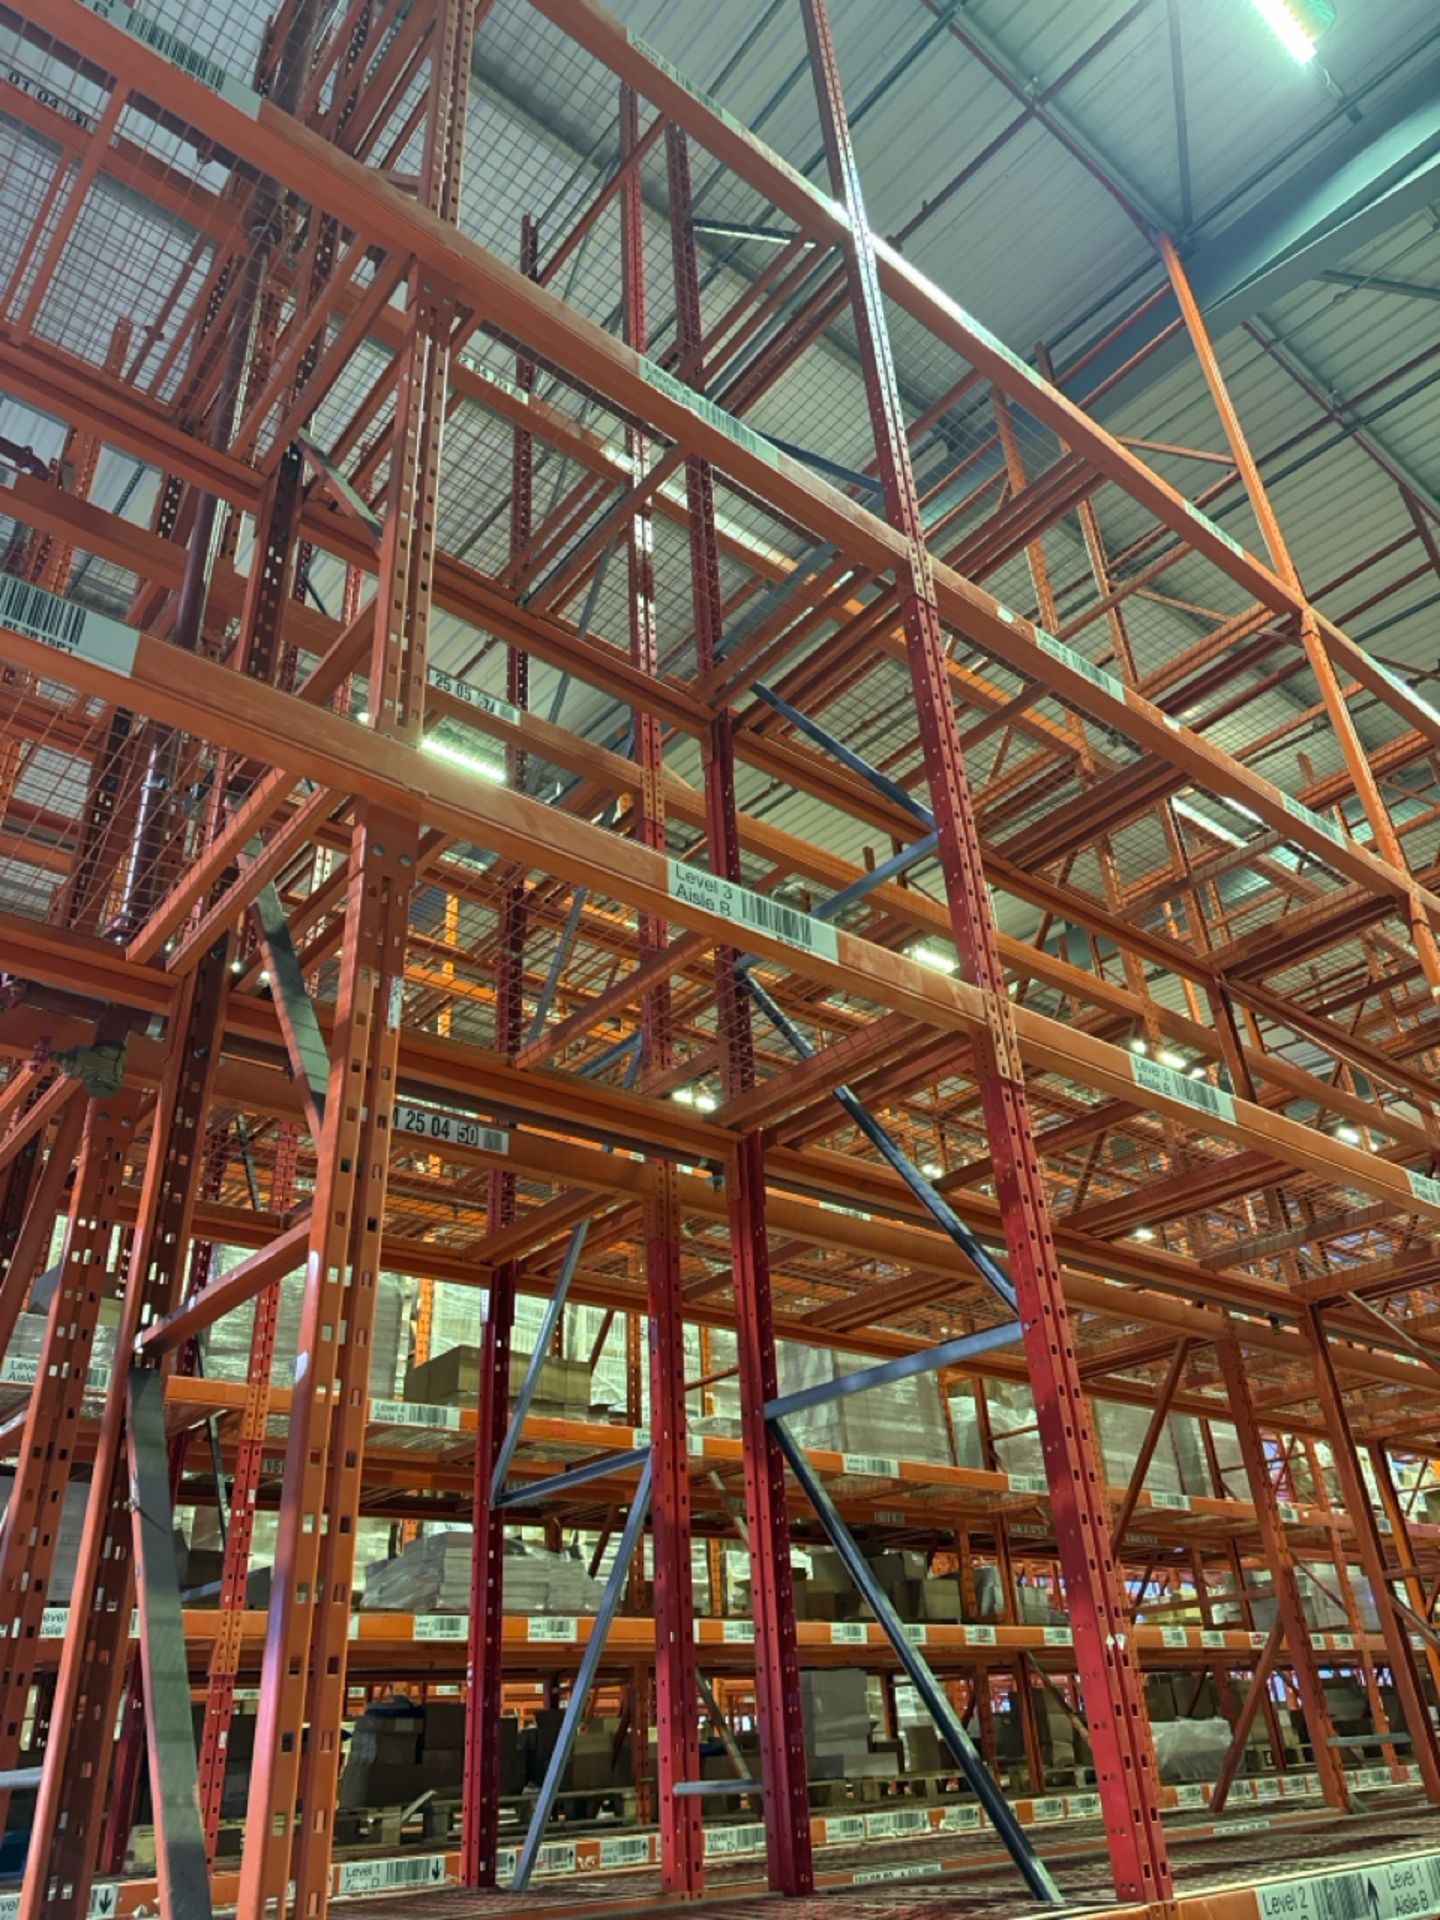 11 Bays Of Boltless Pallet Racking - Image 5 of 11